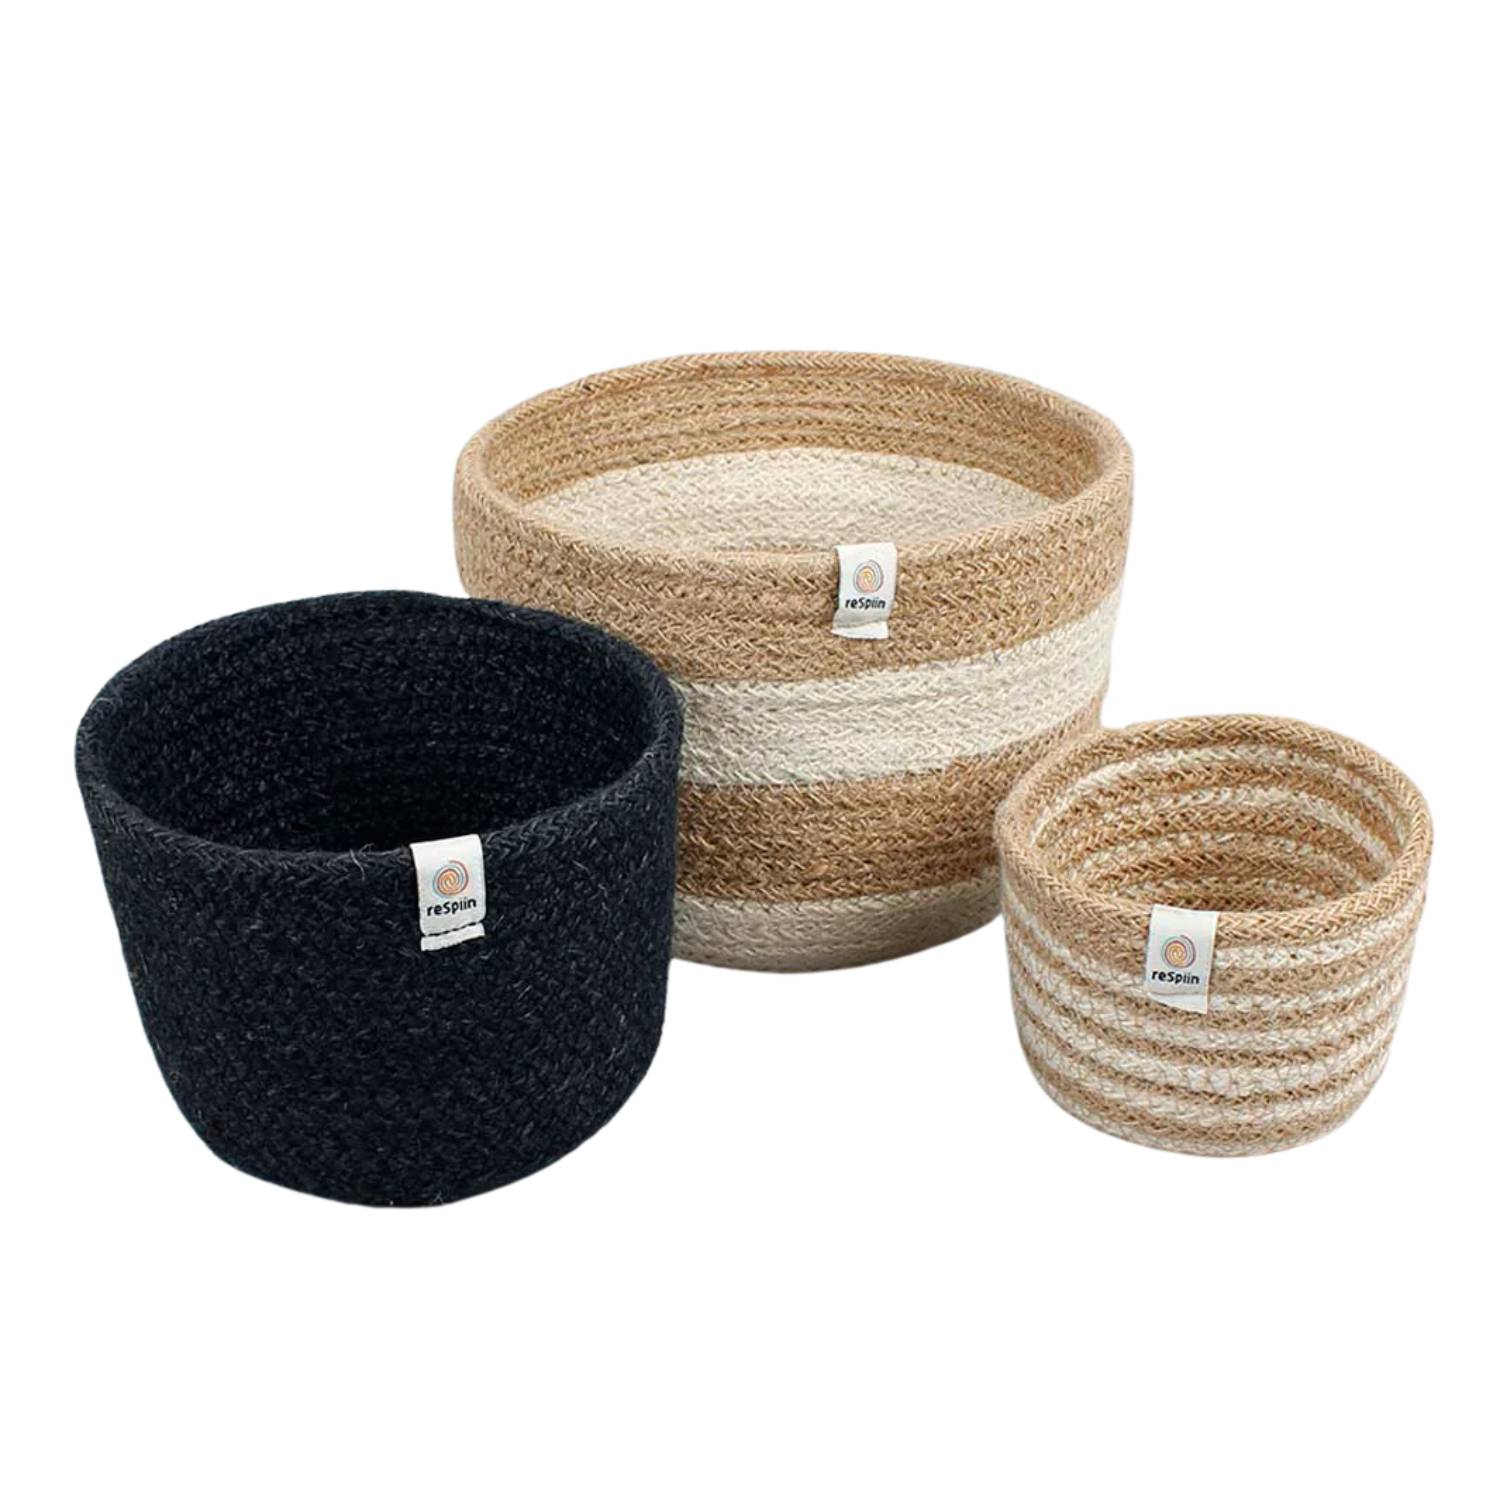 tall woven sustainable basket set of 3